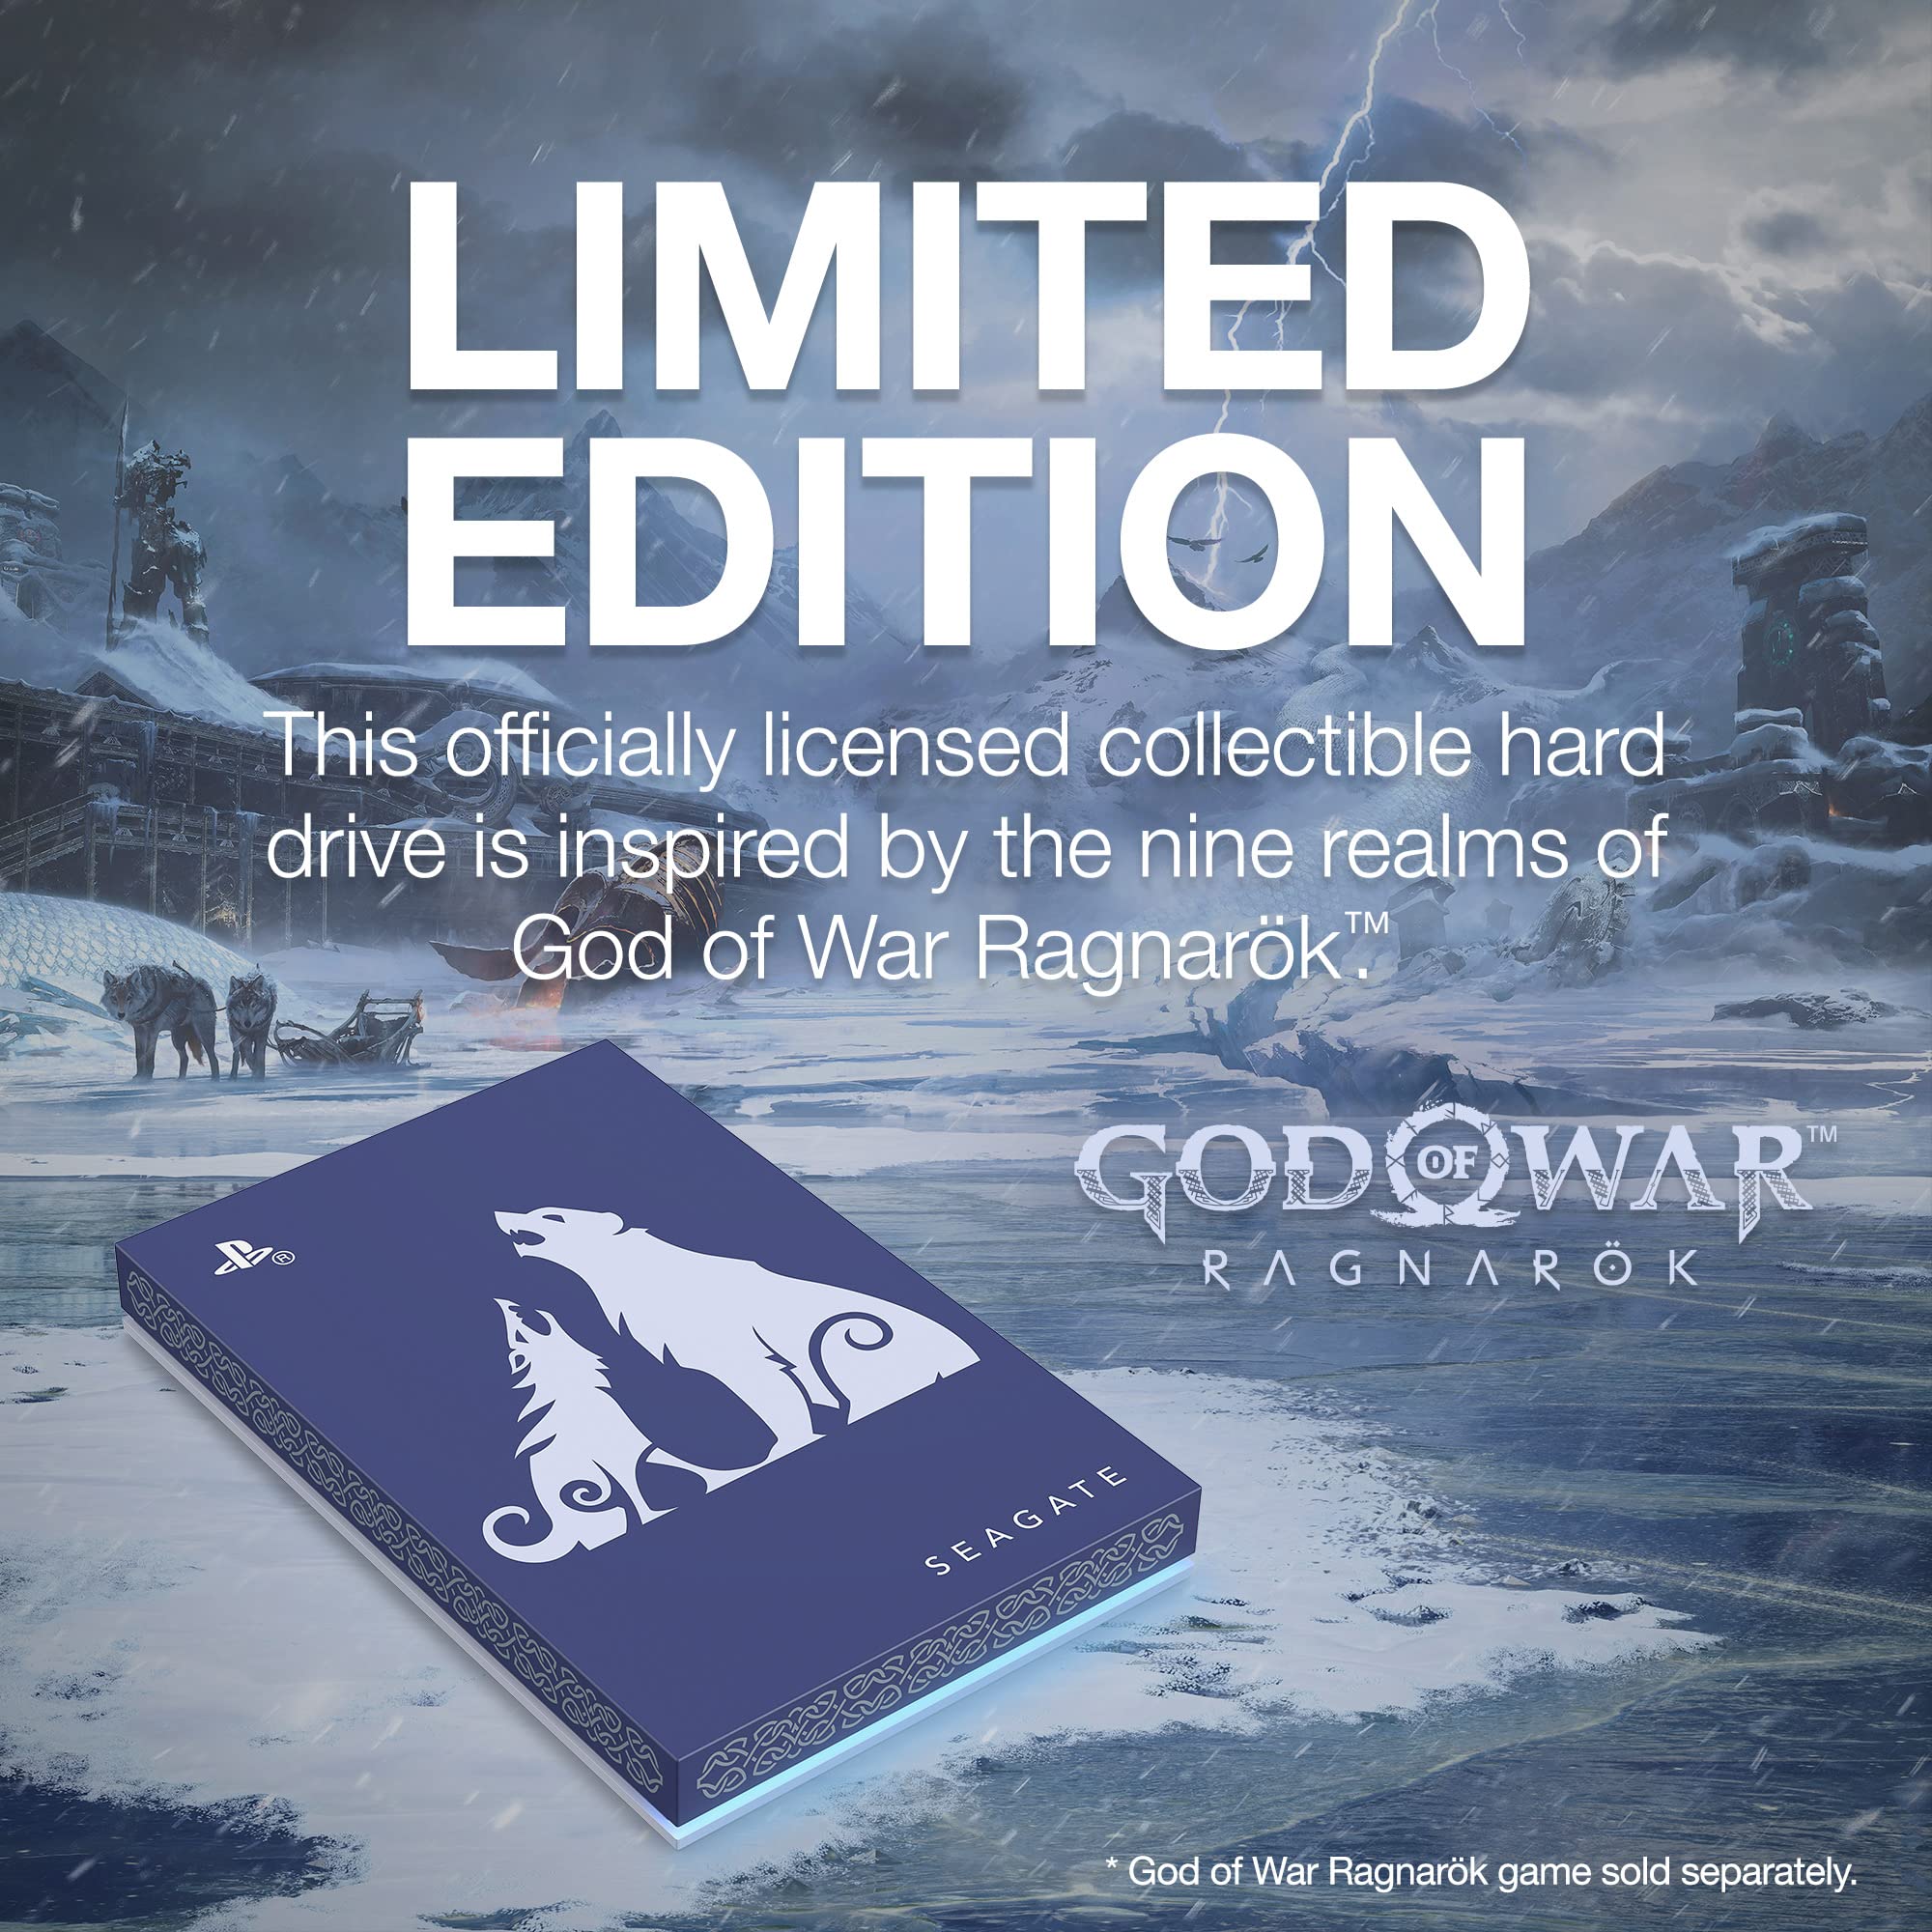 Seagate God of War Ragnarök Limited Edition Game Drive 2TB External Hard Drive - USB 3.0, ICY Blue LED Lighting, Officially-Licensed for Playstation Consoles (STLV2000100)